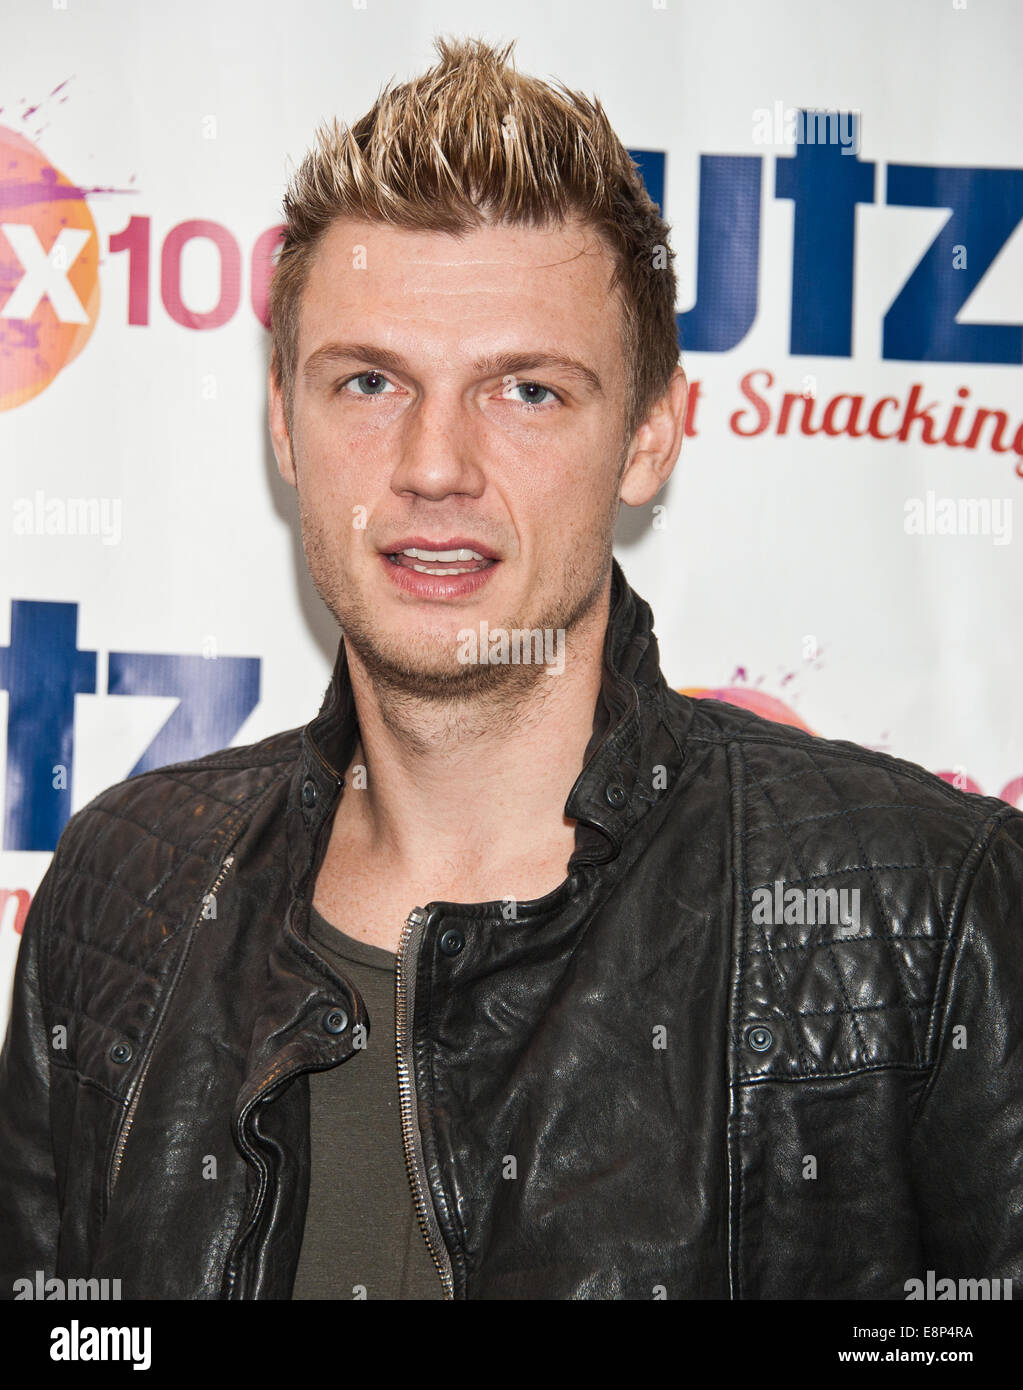 Bala Cynwyd, Pennsylvania, USA. 12th October, 2014. Nick Carter of American Pop Rock Duo Nick & Knight Poses at Mix 106's Performance Theatre on October 12, 2014 in Bala Cynwyd, Pennsylvania, United States. Credit:  Paul Froggatt/Alamy Live News Stock Photo